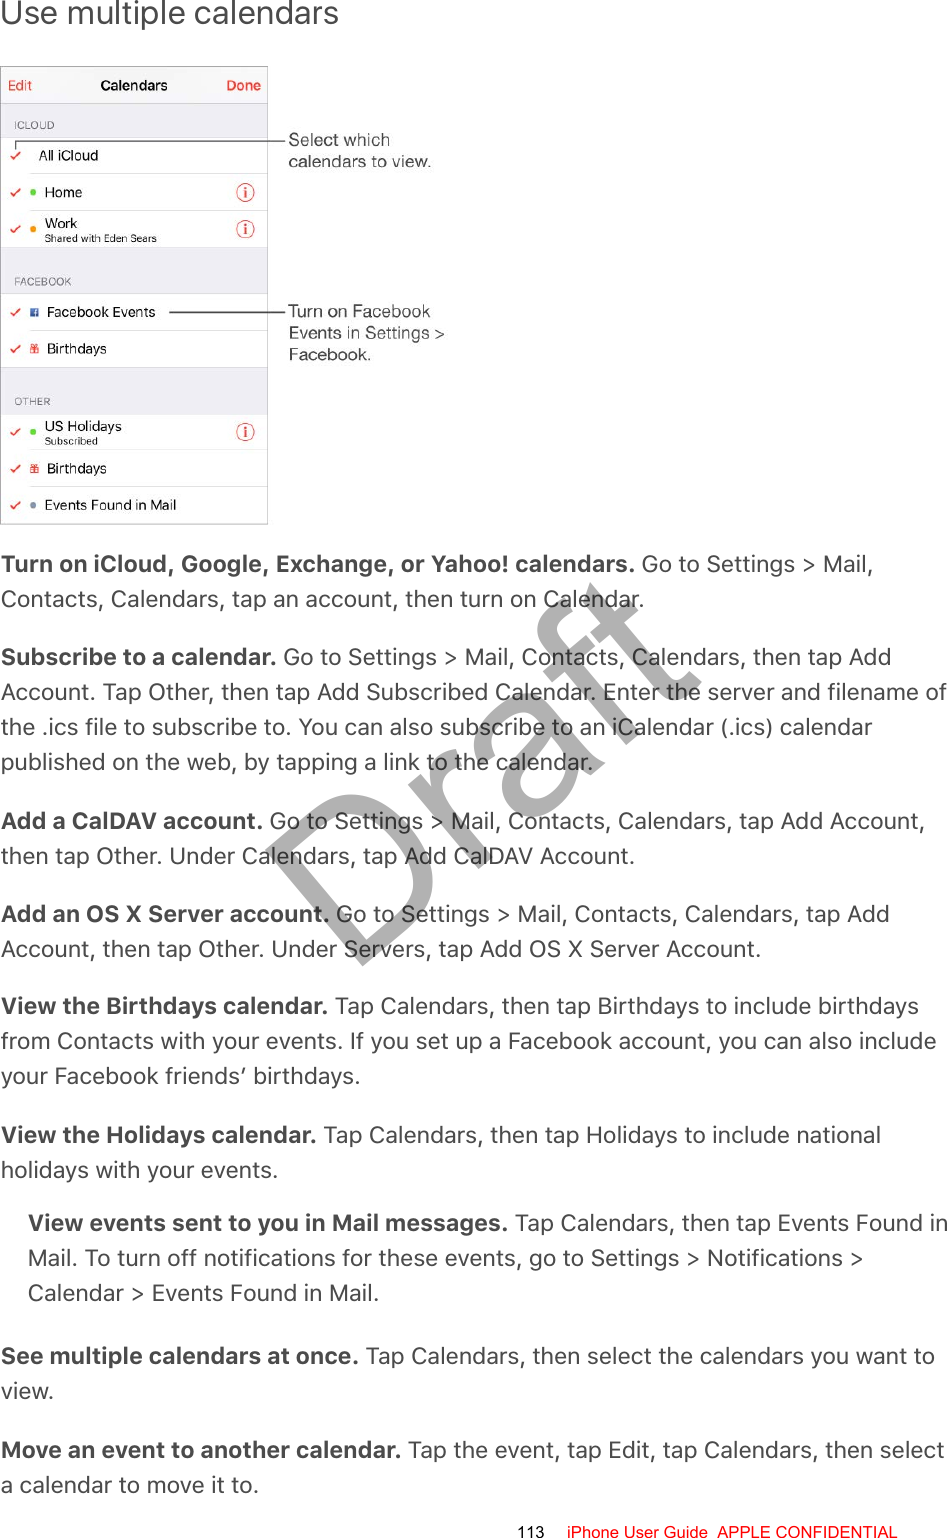 Use multiple calendarsTurn on iCloud, Google, Exchange, or Yahoo! calendars. Go to Settings &gt; Mail,Contacts, Calendars, tap an account, then turn on Calendar.Subscribe to a calendar. Go to Settings &gt; Mail, Contacts, Calendars, then tap AddAccount. Tap Other, then tap Add Subscribed Calendar. Enter the server and filename ofthe .ics file to subscribe to. You can also subscribe to an iCalendar (.ics) calendarpublished on the web, by tapping a link to the calendar.Add a CalDAV account. Go to Settings &gt; Mail, Contacts, Calendars, tap Add Account,then tap Other. Under Calendars, tap Add CalDAV Account.Add an OS X Server account. Go to Settings &gt; Mail, Contacts, Calendars, tap AddAccount, then tap Other. Under Servers, tap Add OS X Server Account.View the Birthdays calendar. Tap Calendars, then tap Birthdays to include birthdaysfrom Contacts with your events. If you set up a Facebook account, you can also includeyour Facebook friends’ birthdays.View the Holidays calendar. Tap Calendars, then tap Holidays to include nationalholidays with your events.View events sent to you in Mail messages. Tap Calendars, then tap Events Found inMail. To turn off notifications for these events, go to Settings &gt; Notifications &gt;Calendar &gt; Events Found in Mail.See multiple calendars at once. Tap Calendars, then select the calendars you want toview.Move an event to another calendar. Tap the event, tap Edit, tap Calendars, then selecta calendar to move it to.113 iPhone User Guide  APPLE CONFIDENTIALDraft